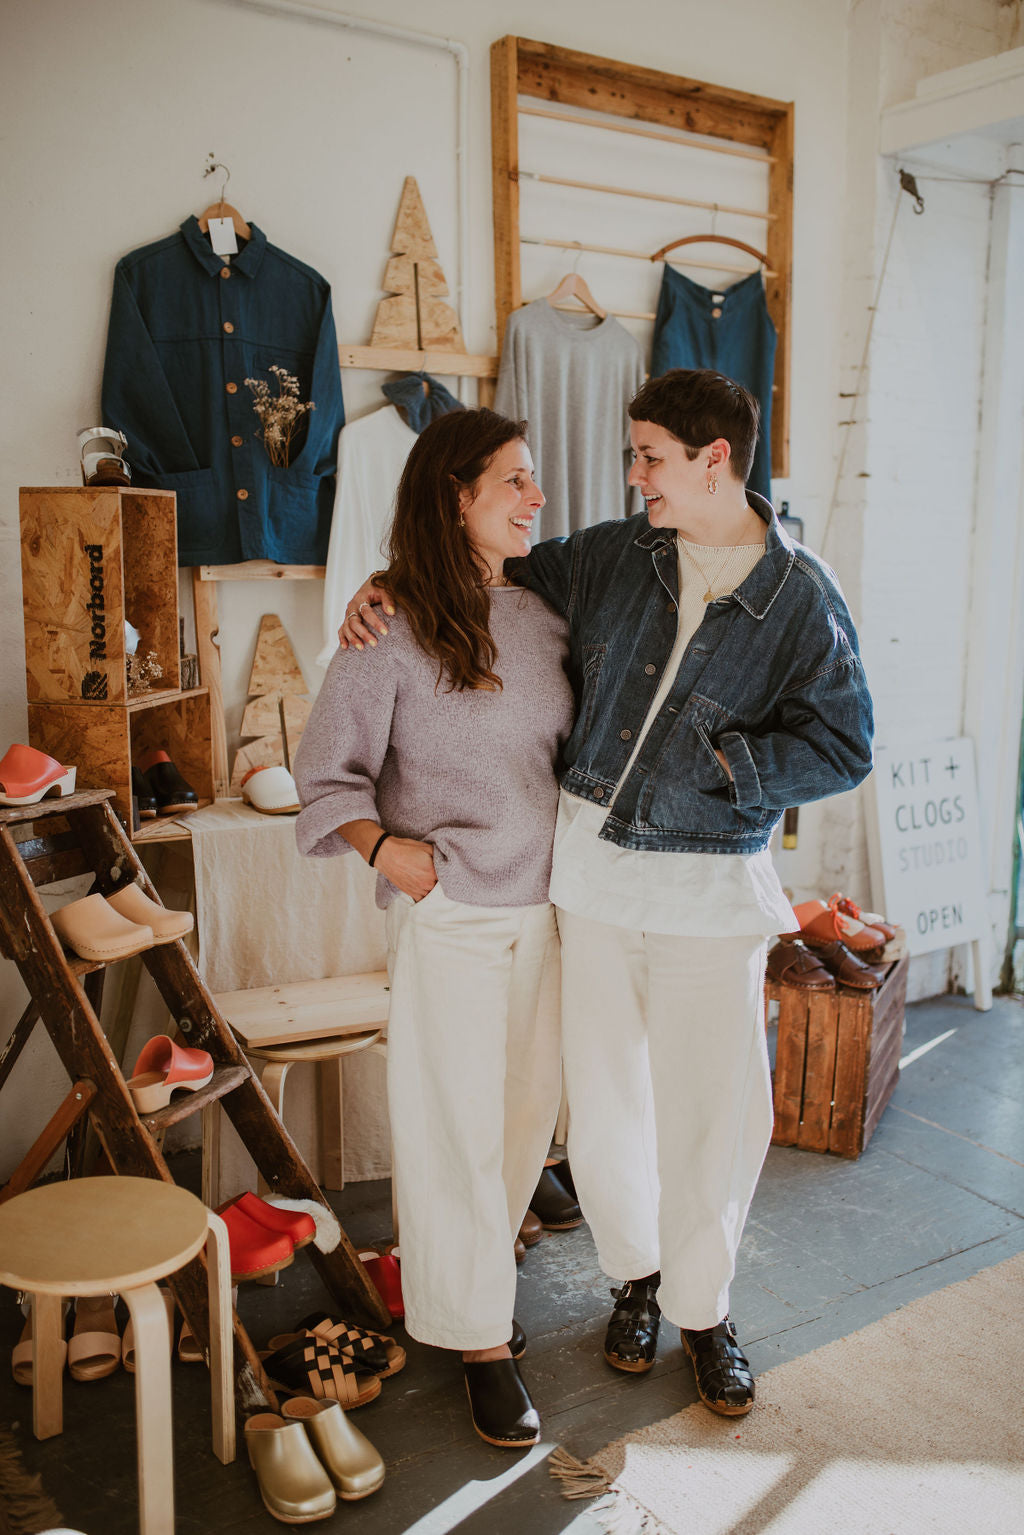 Folk: In Conversation with KIT + CLOGS